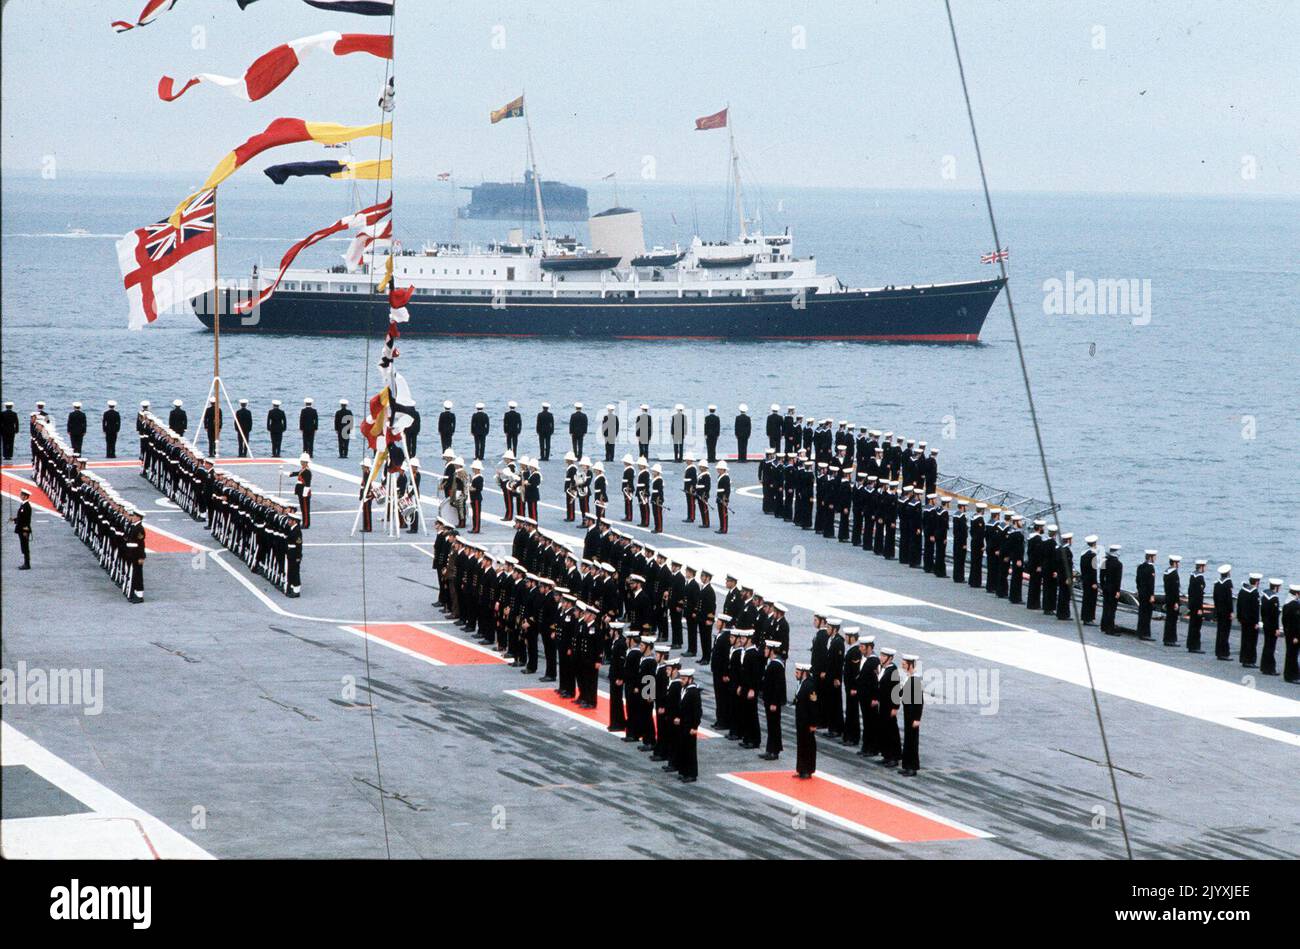 File photo dated 18/6/1977 of the Royal Yacht Britannia passing a Royal Navy aircraft carrier during the Silver Jubilee Review of the Fleet at Spithead. The Queen's 1977 Silver Jubilee saw millions celebrating her reign at street parties across the country and the affection shown by crowds was a surprise even to the Queen. Issue date: Thursday September 8, 2022. Stock Photo